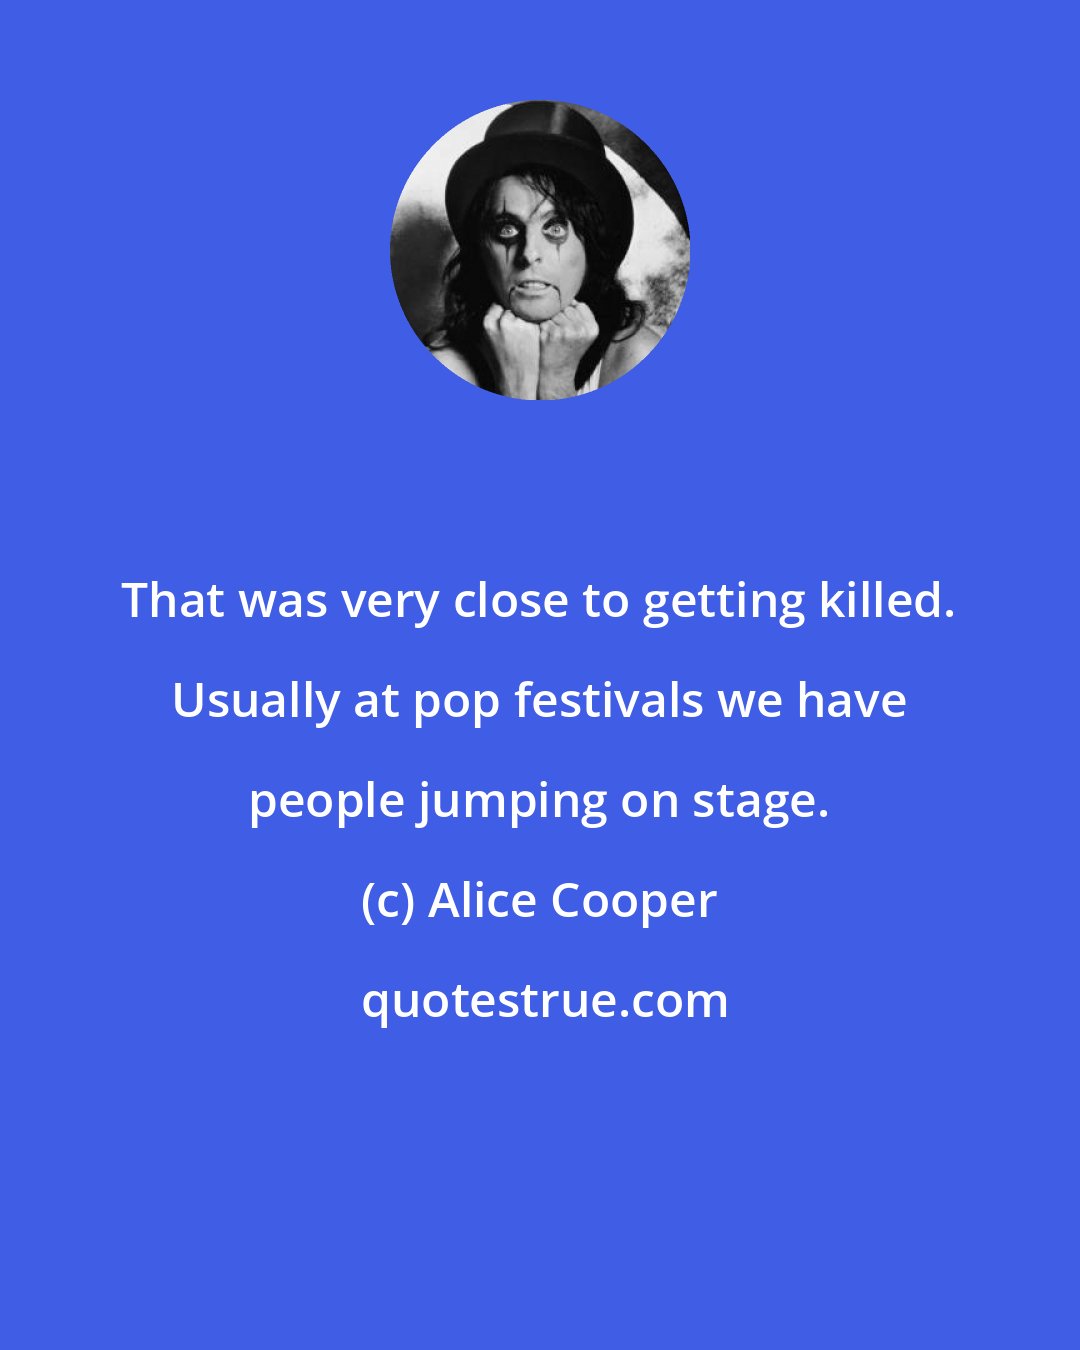 Alice Cooper: That was very close to getting killed. Usually at pop festivals we have people jumping on stage.